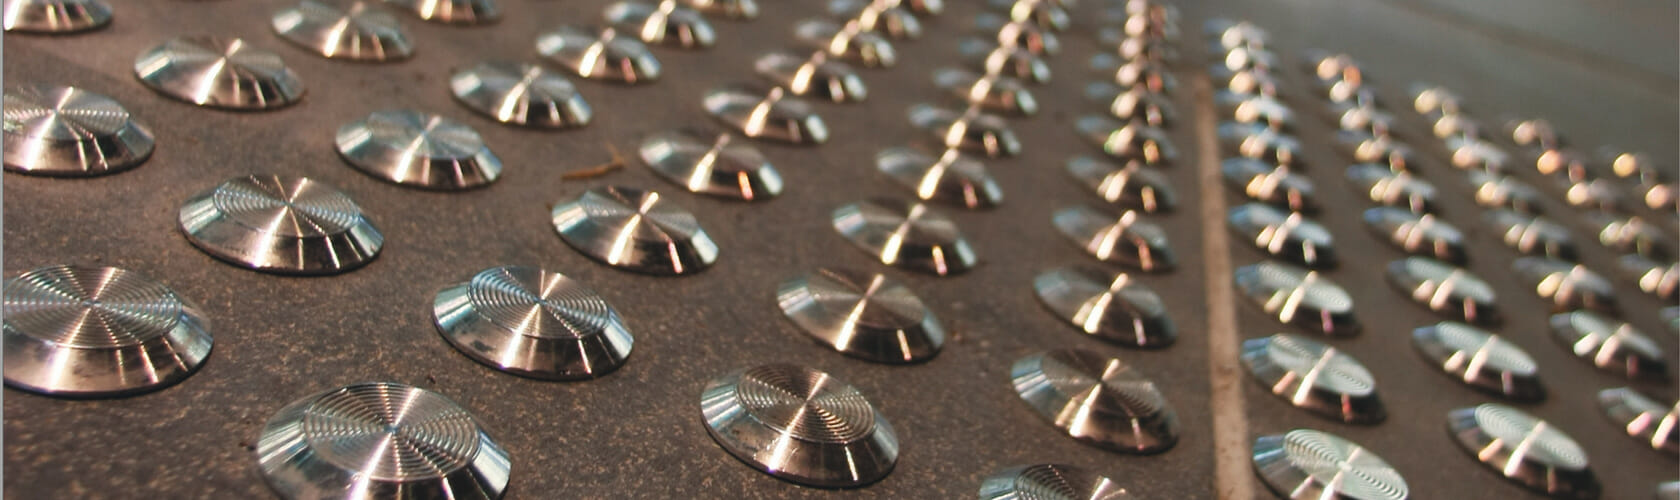 Image of a SureSteel - Stainless Steel Tactile Indicators available from www.gripACTion.com.au